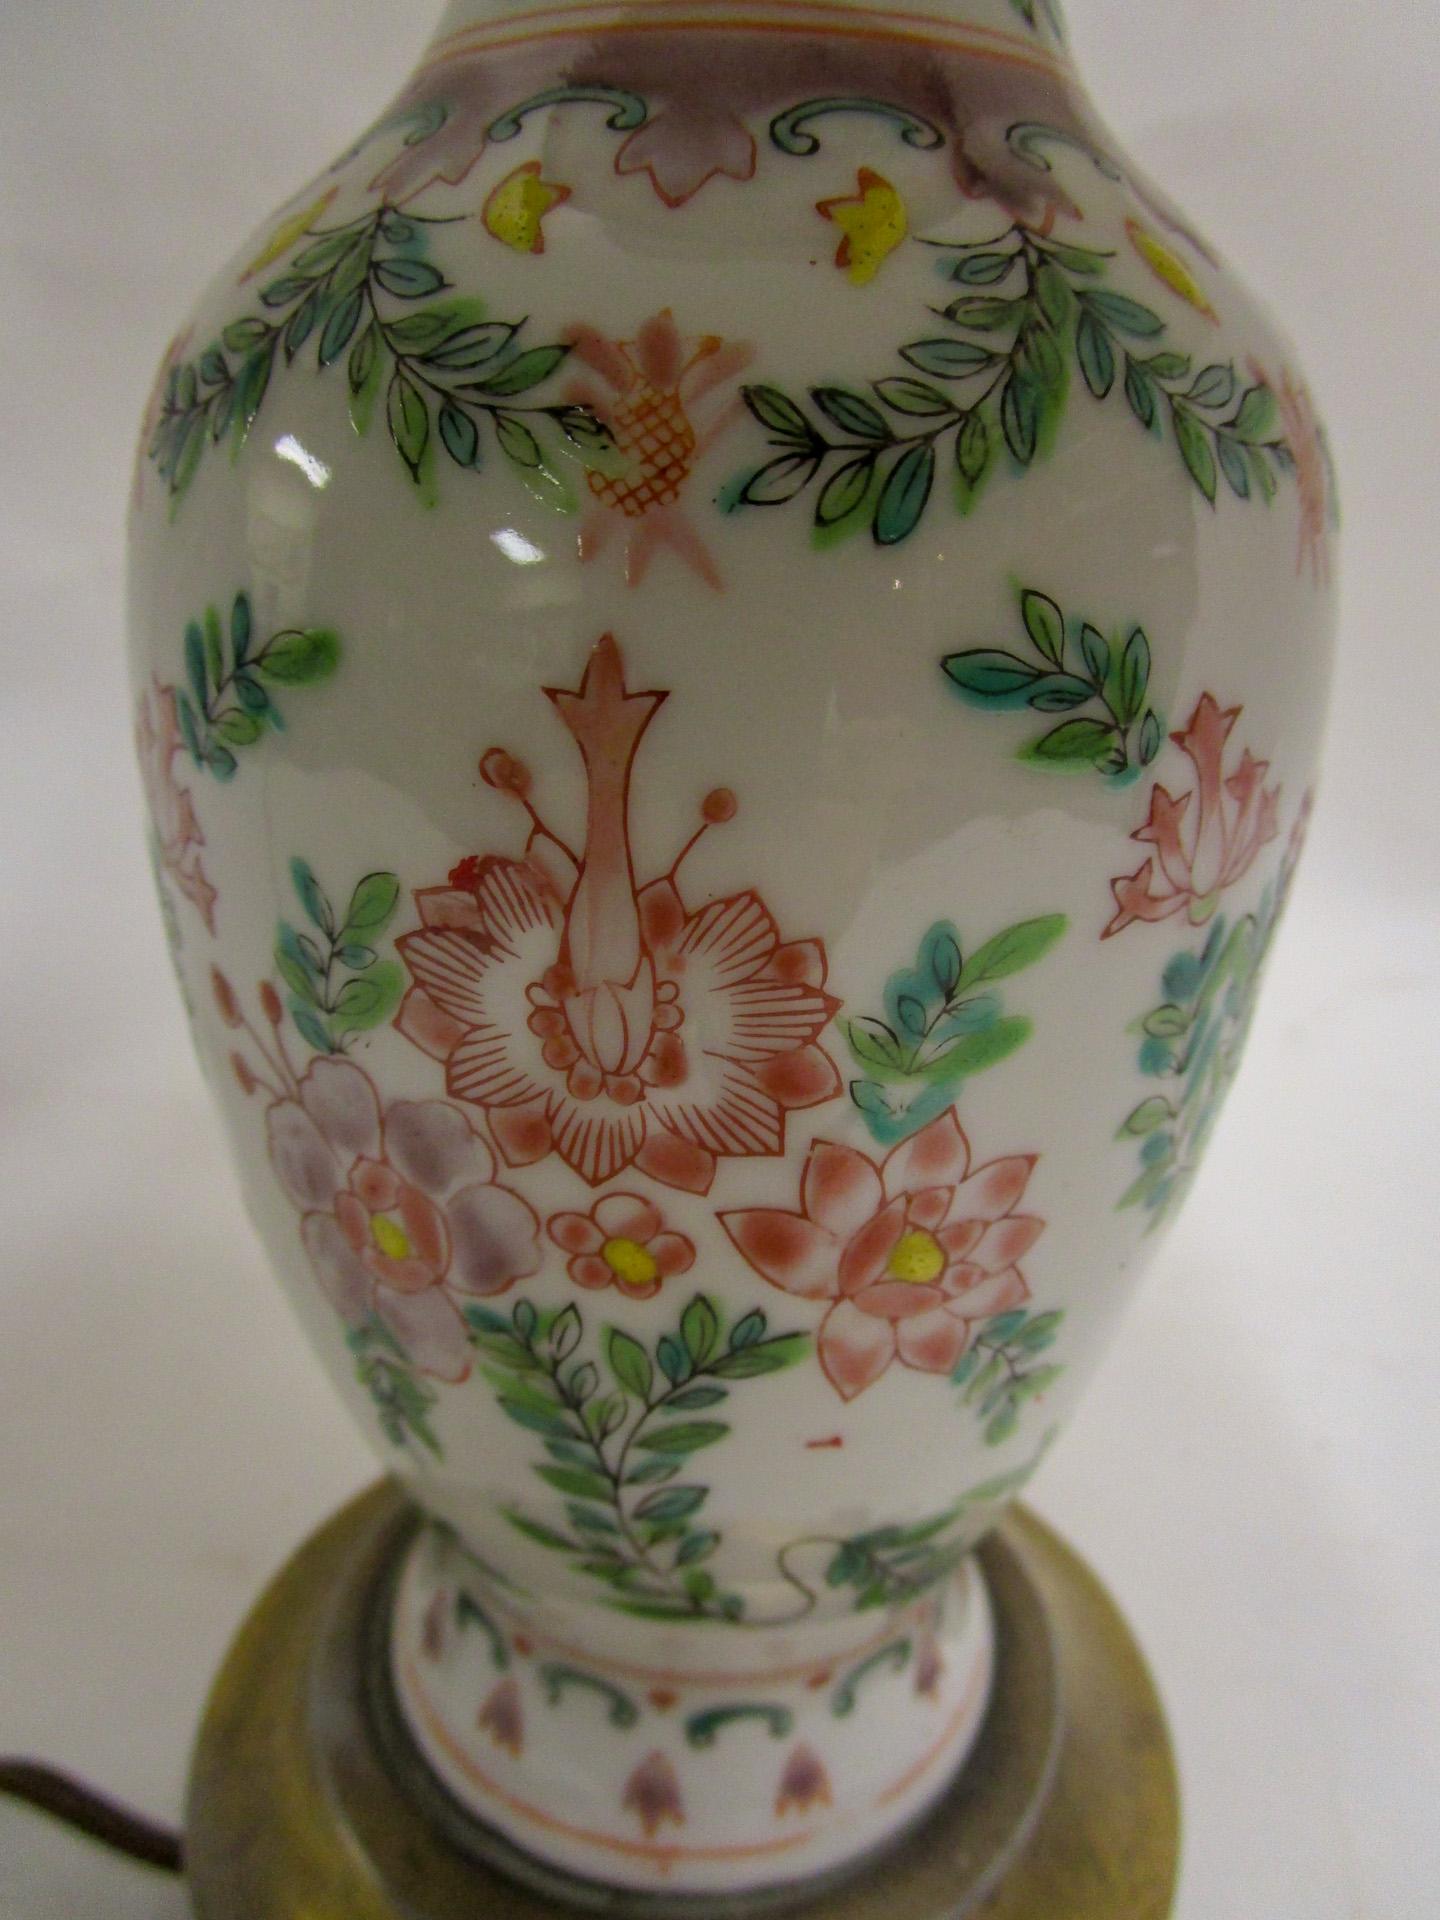 Late 19th century Chinese Export porcelain lamp in a nice petite size. Featuring a 7 inch tall fine porcelain vase in a pink and green floral design, it sits atop a brass footed base. The new silk shade measures 8 inches tall x 11 inches wide x 8.50